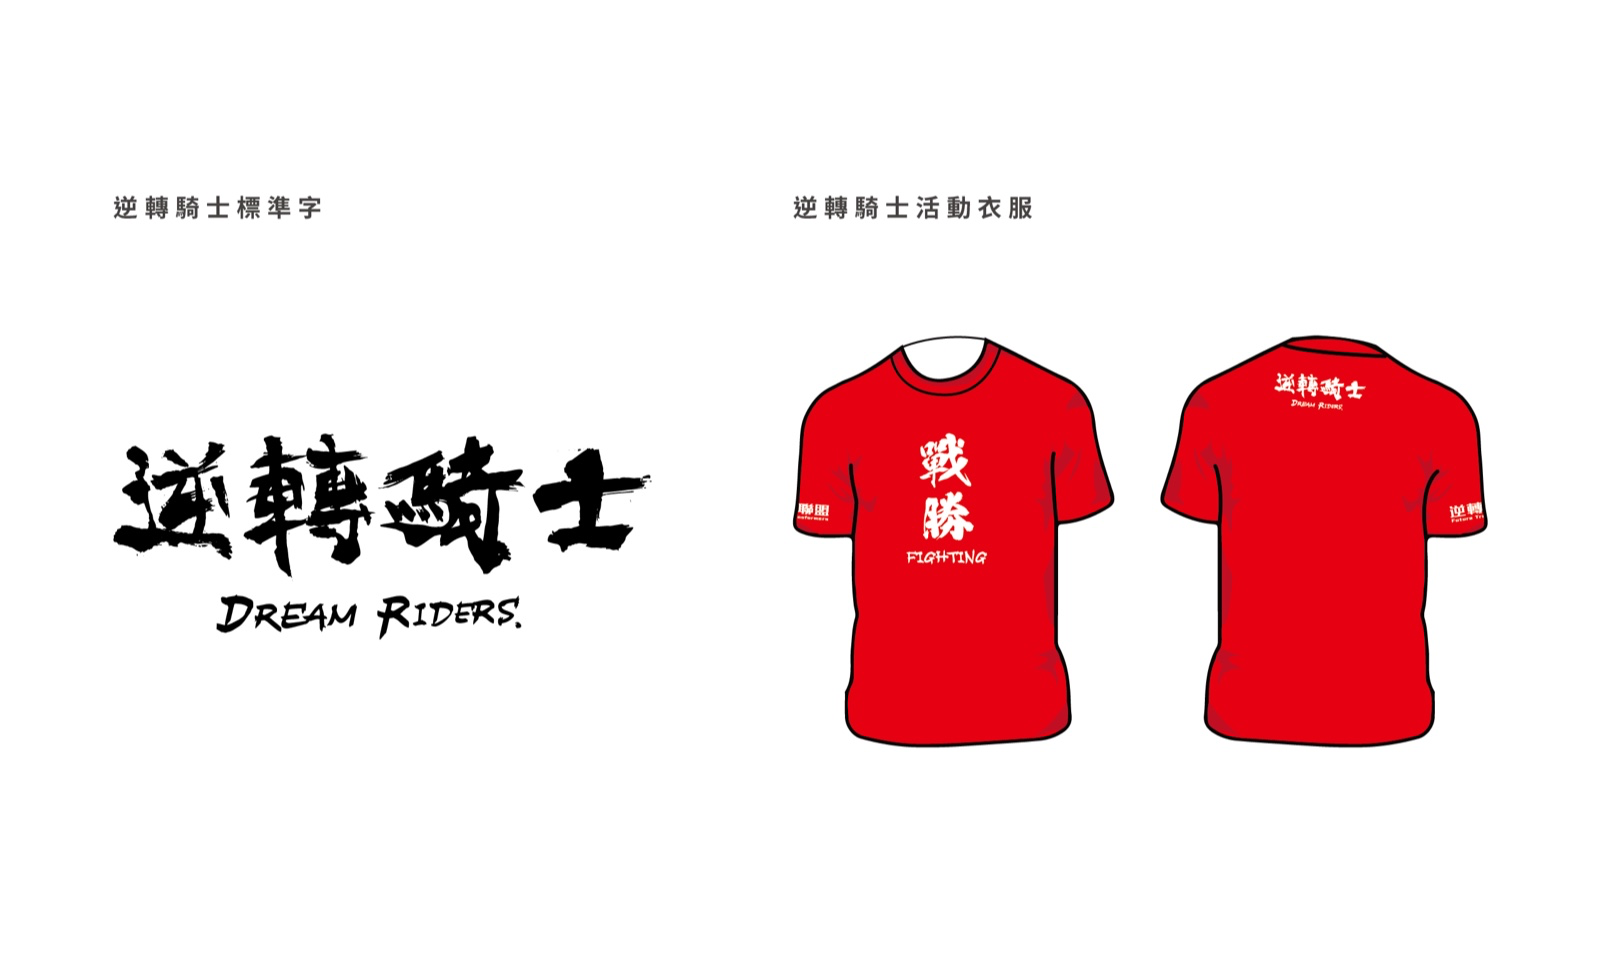 Calligraphic fonts are used for the logotype design of Dream Riders to express the fiery spirit of riders. The word “victory” is printed in calligraphic fonts on the uniform, for which the color red is chosen to express vitality and passion.  | Taipei Cultural experience | CAN Culture